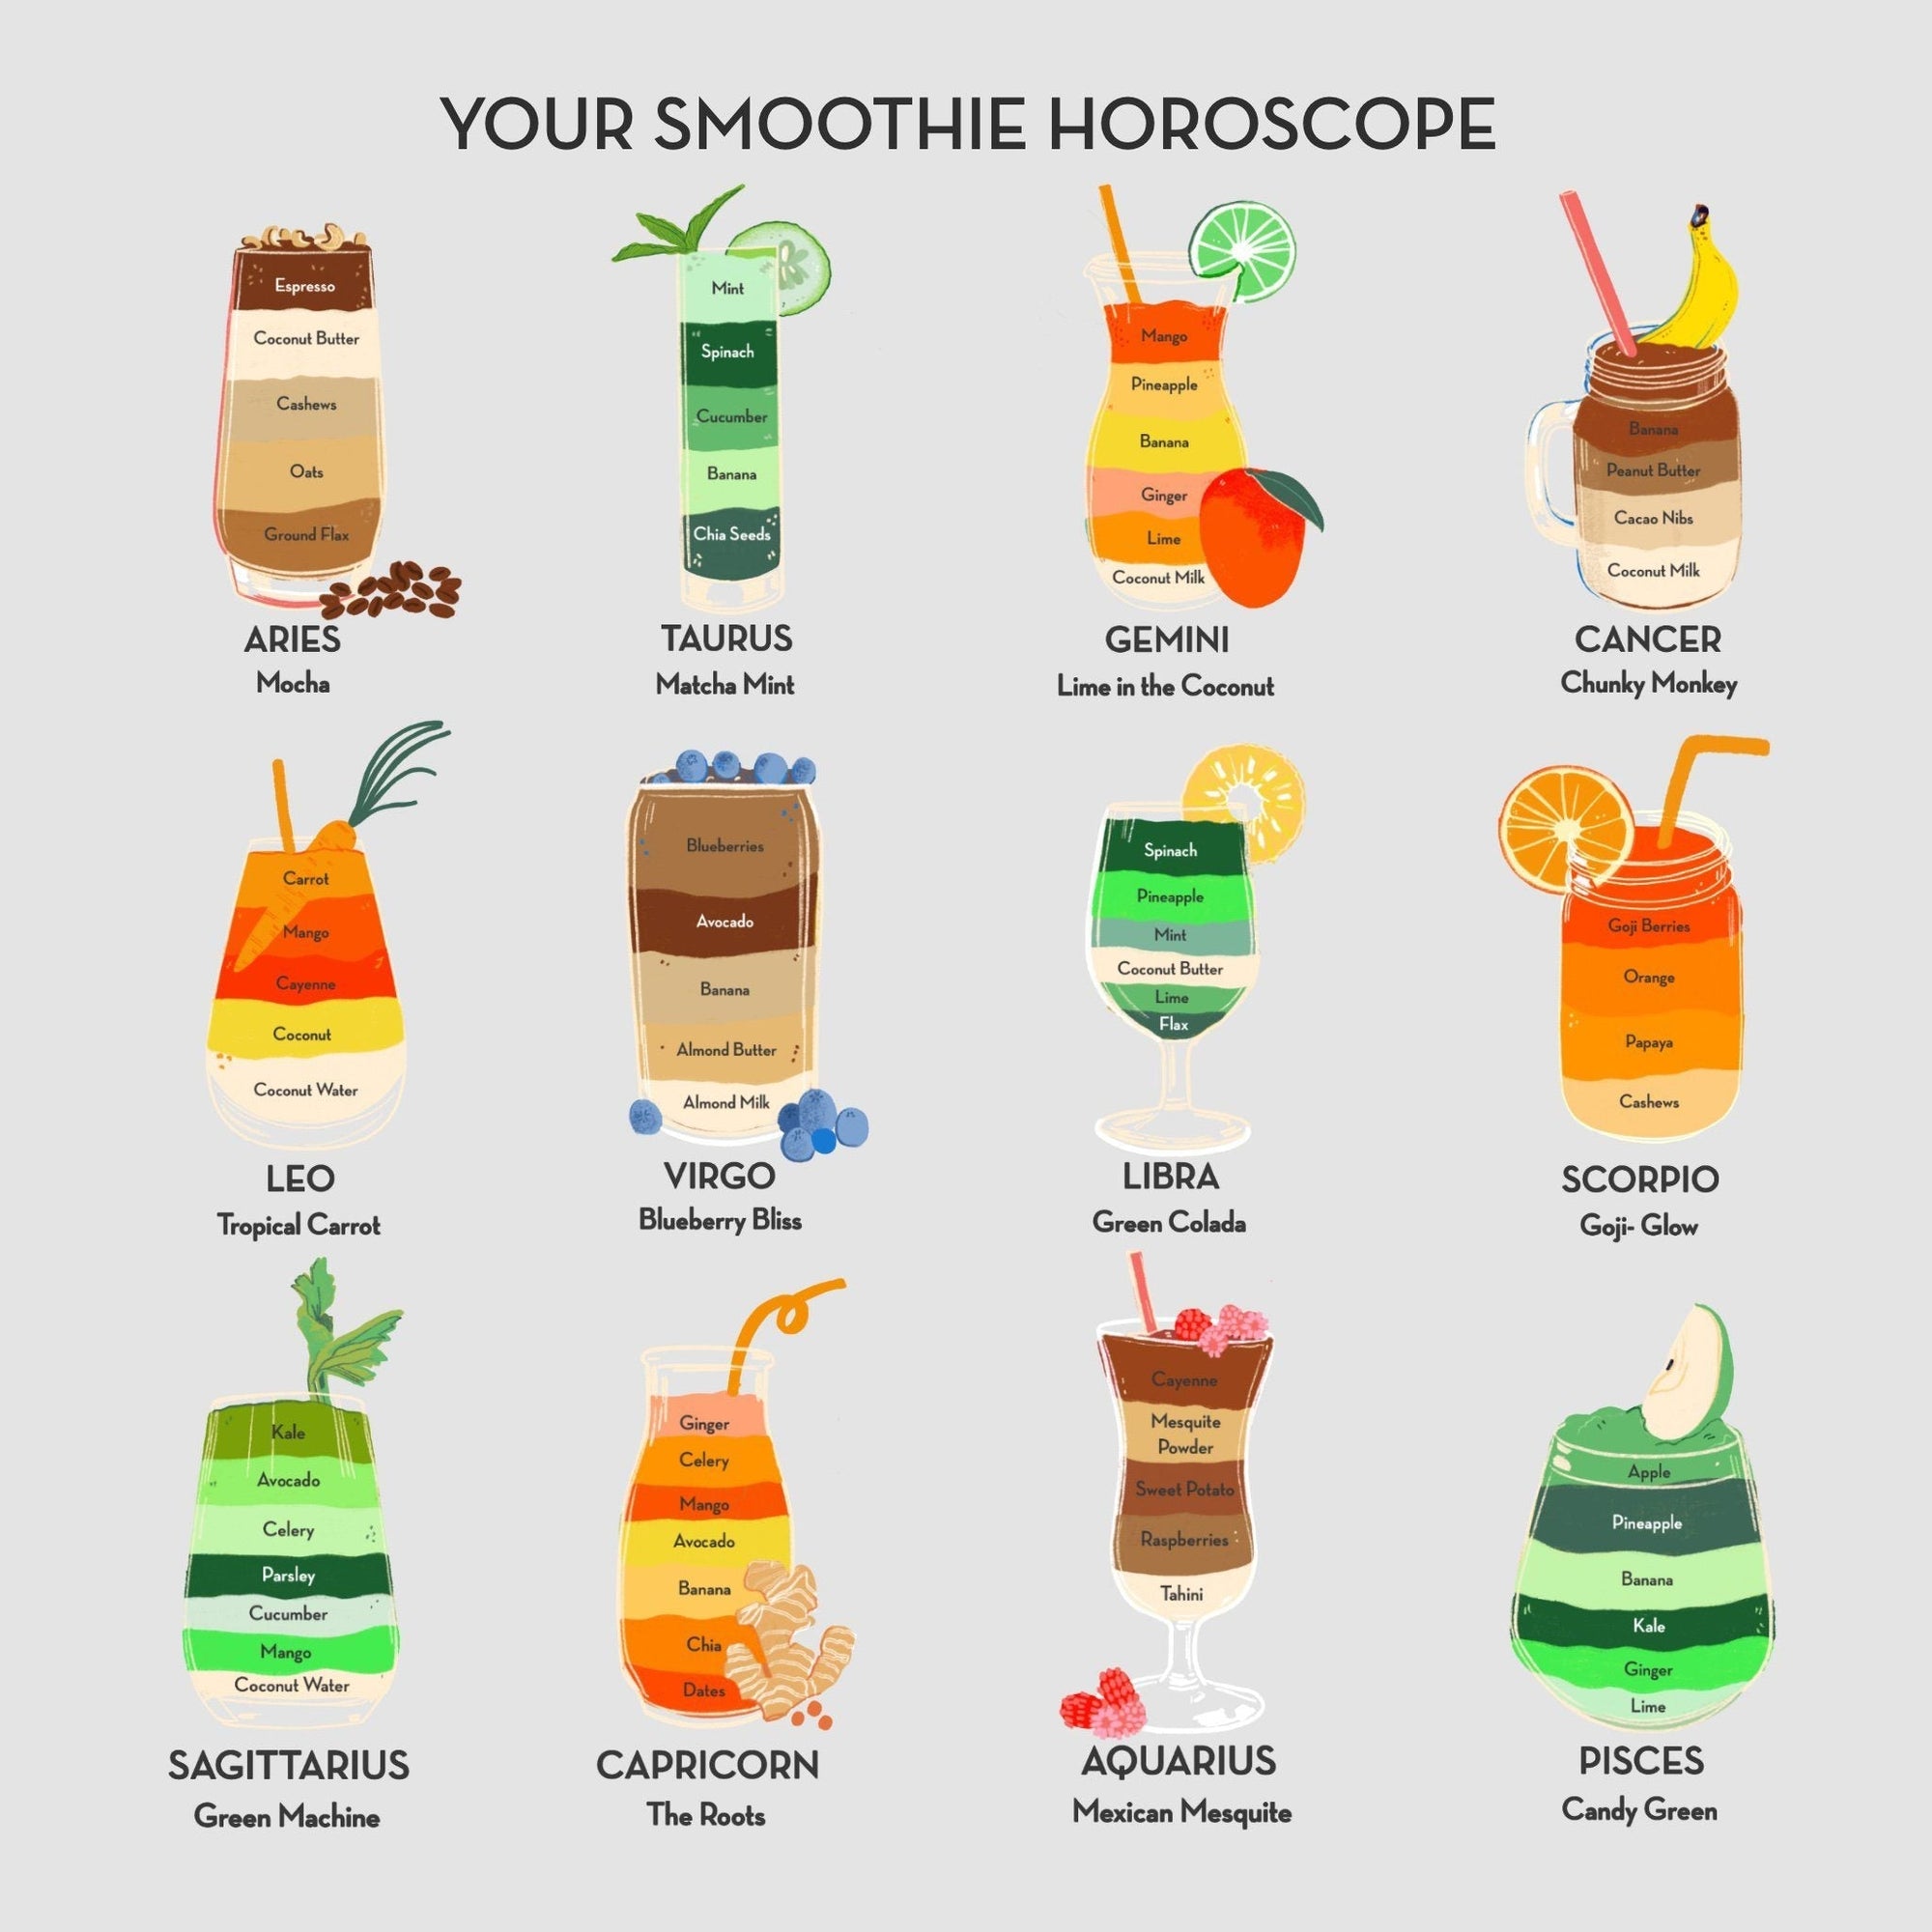 The Best Adaptogenic Smoothie Recipe for Every Zodiac Sign